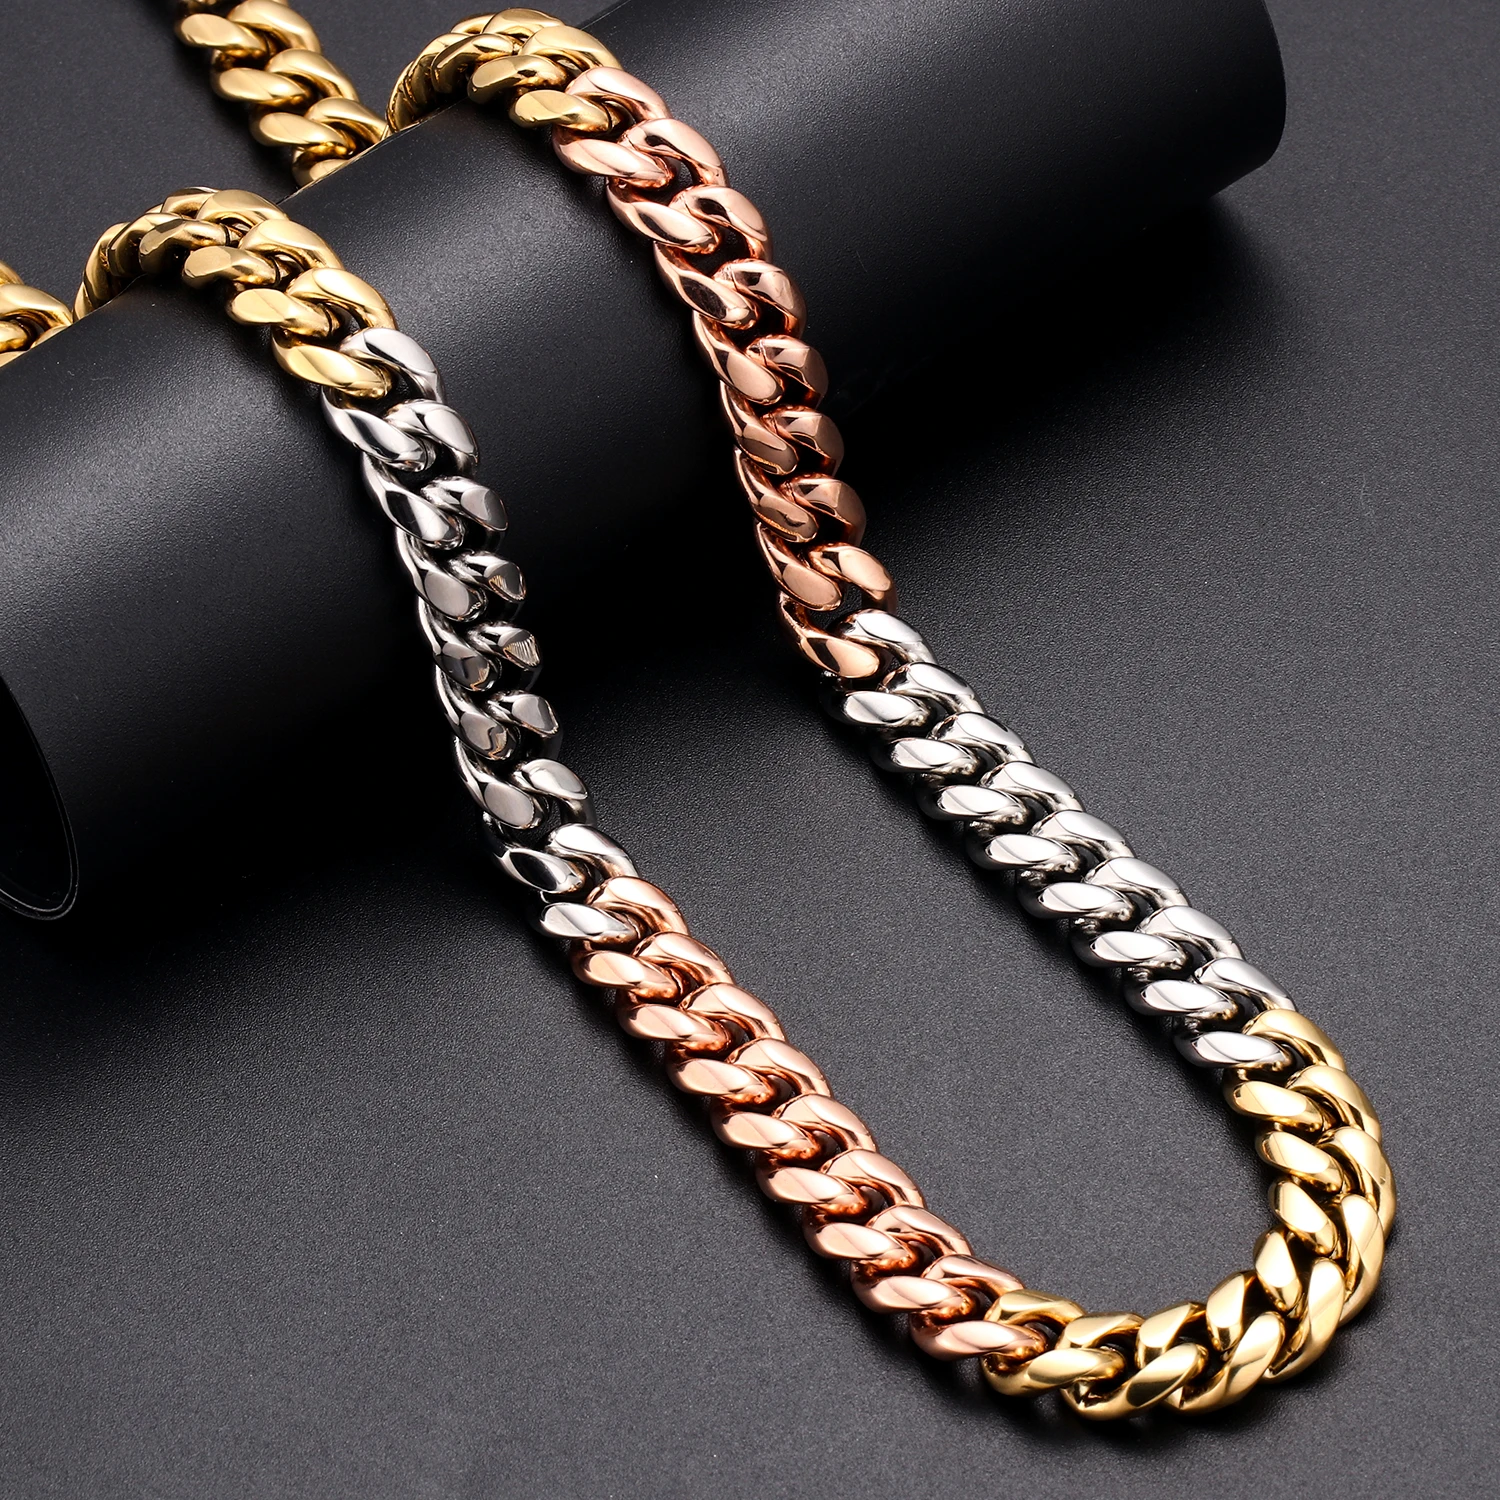 Gold Plated Stainless Steel Necklace Jewelry Chain Men Buy Stainless